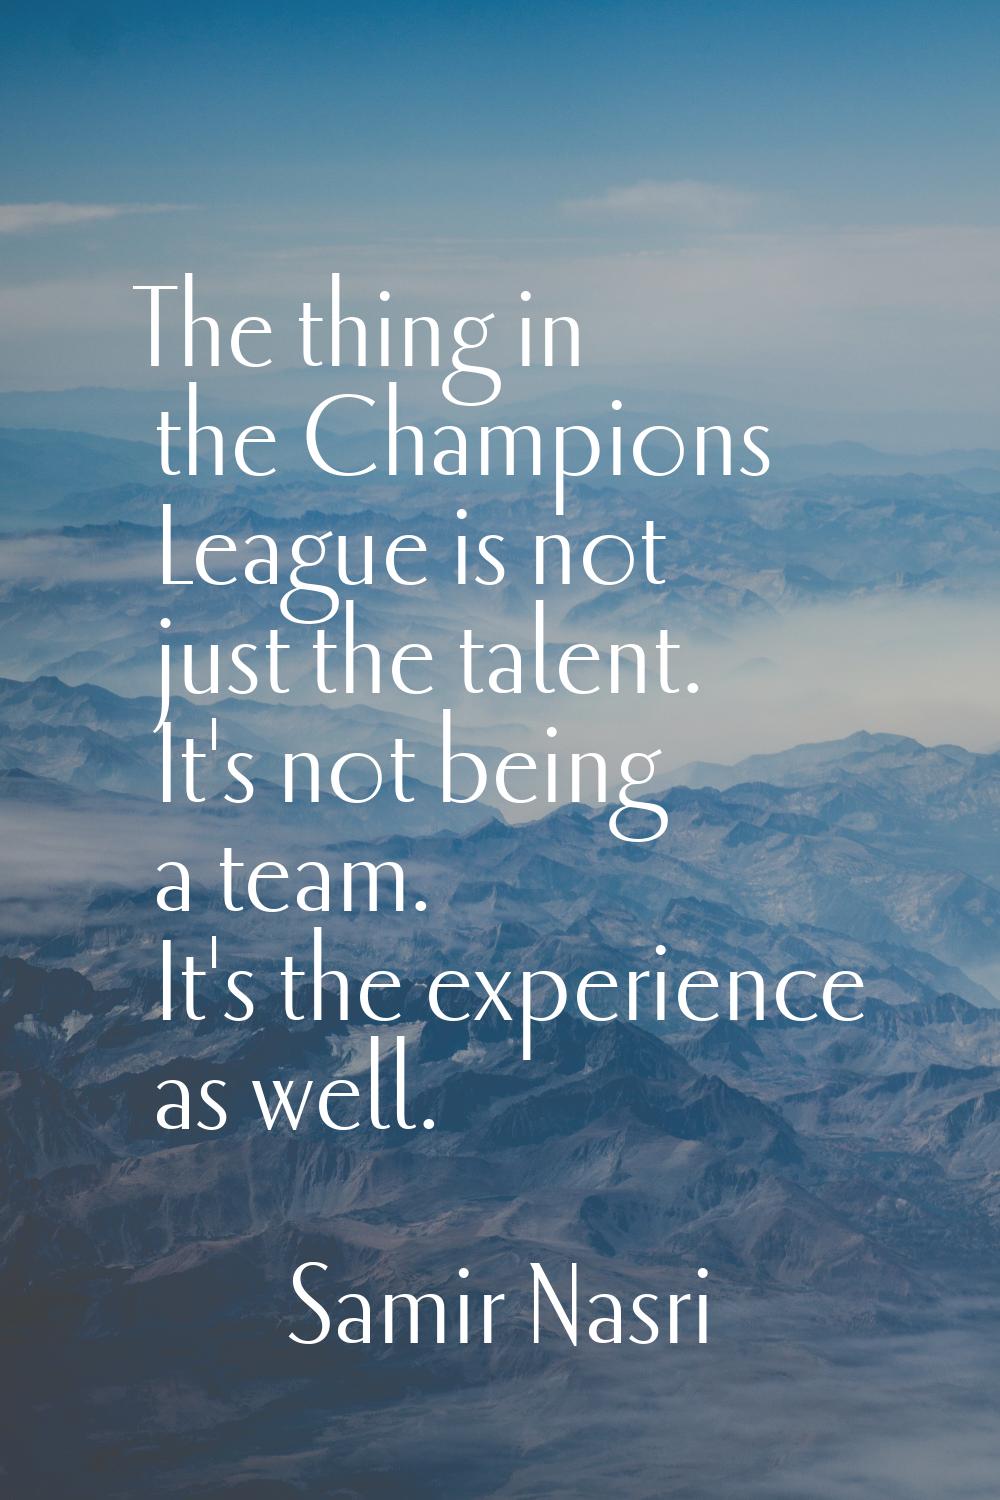 The thing in the Champions League is not just the talent. It's not being a team. It's the experienc